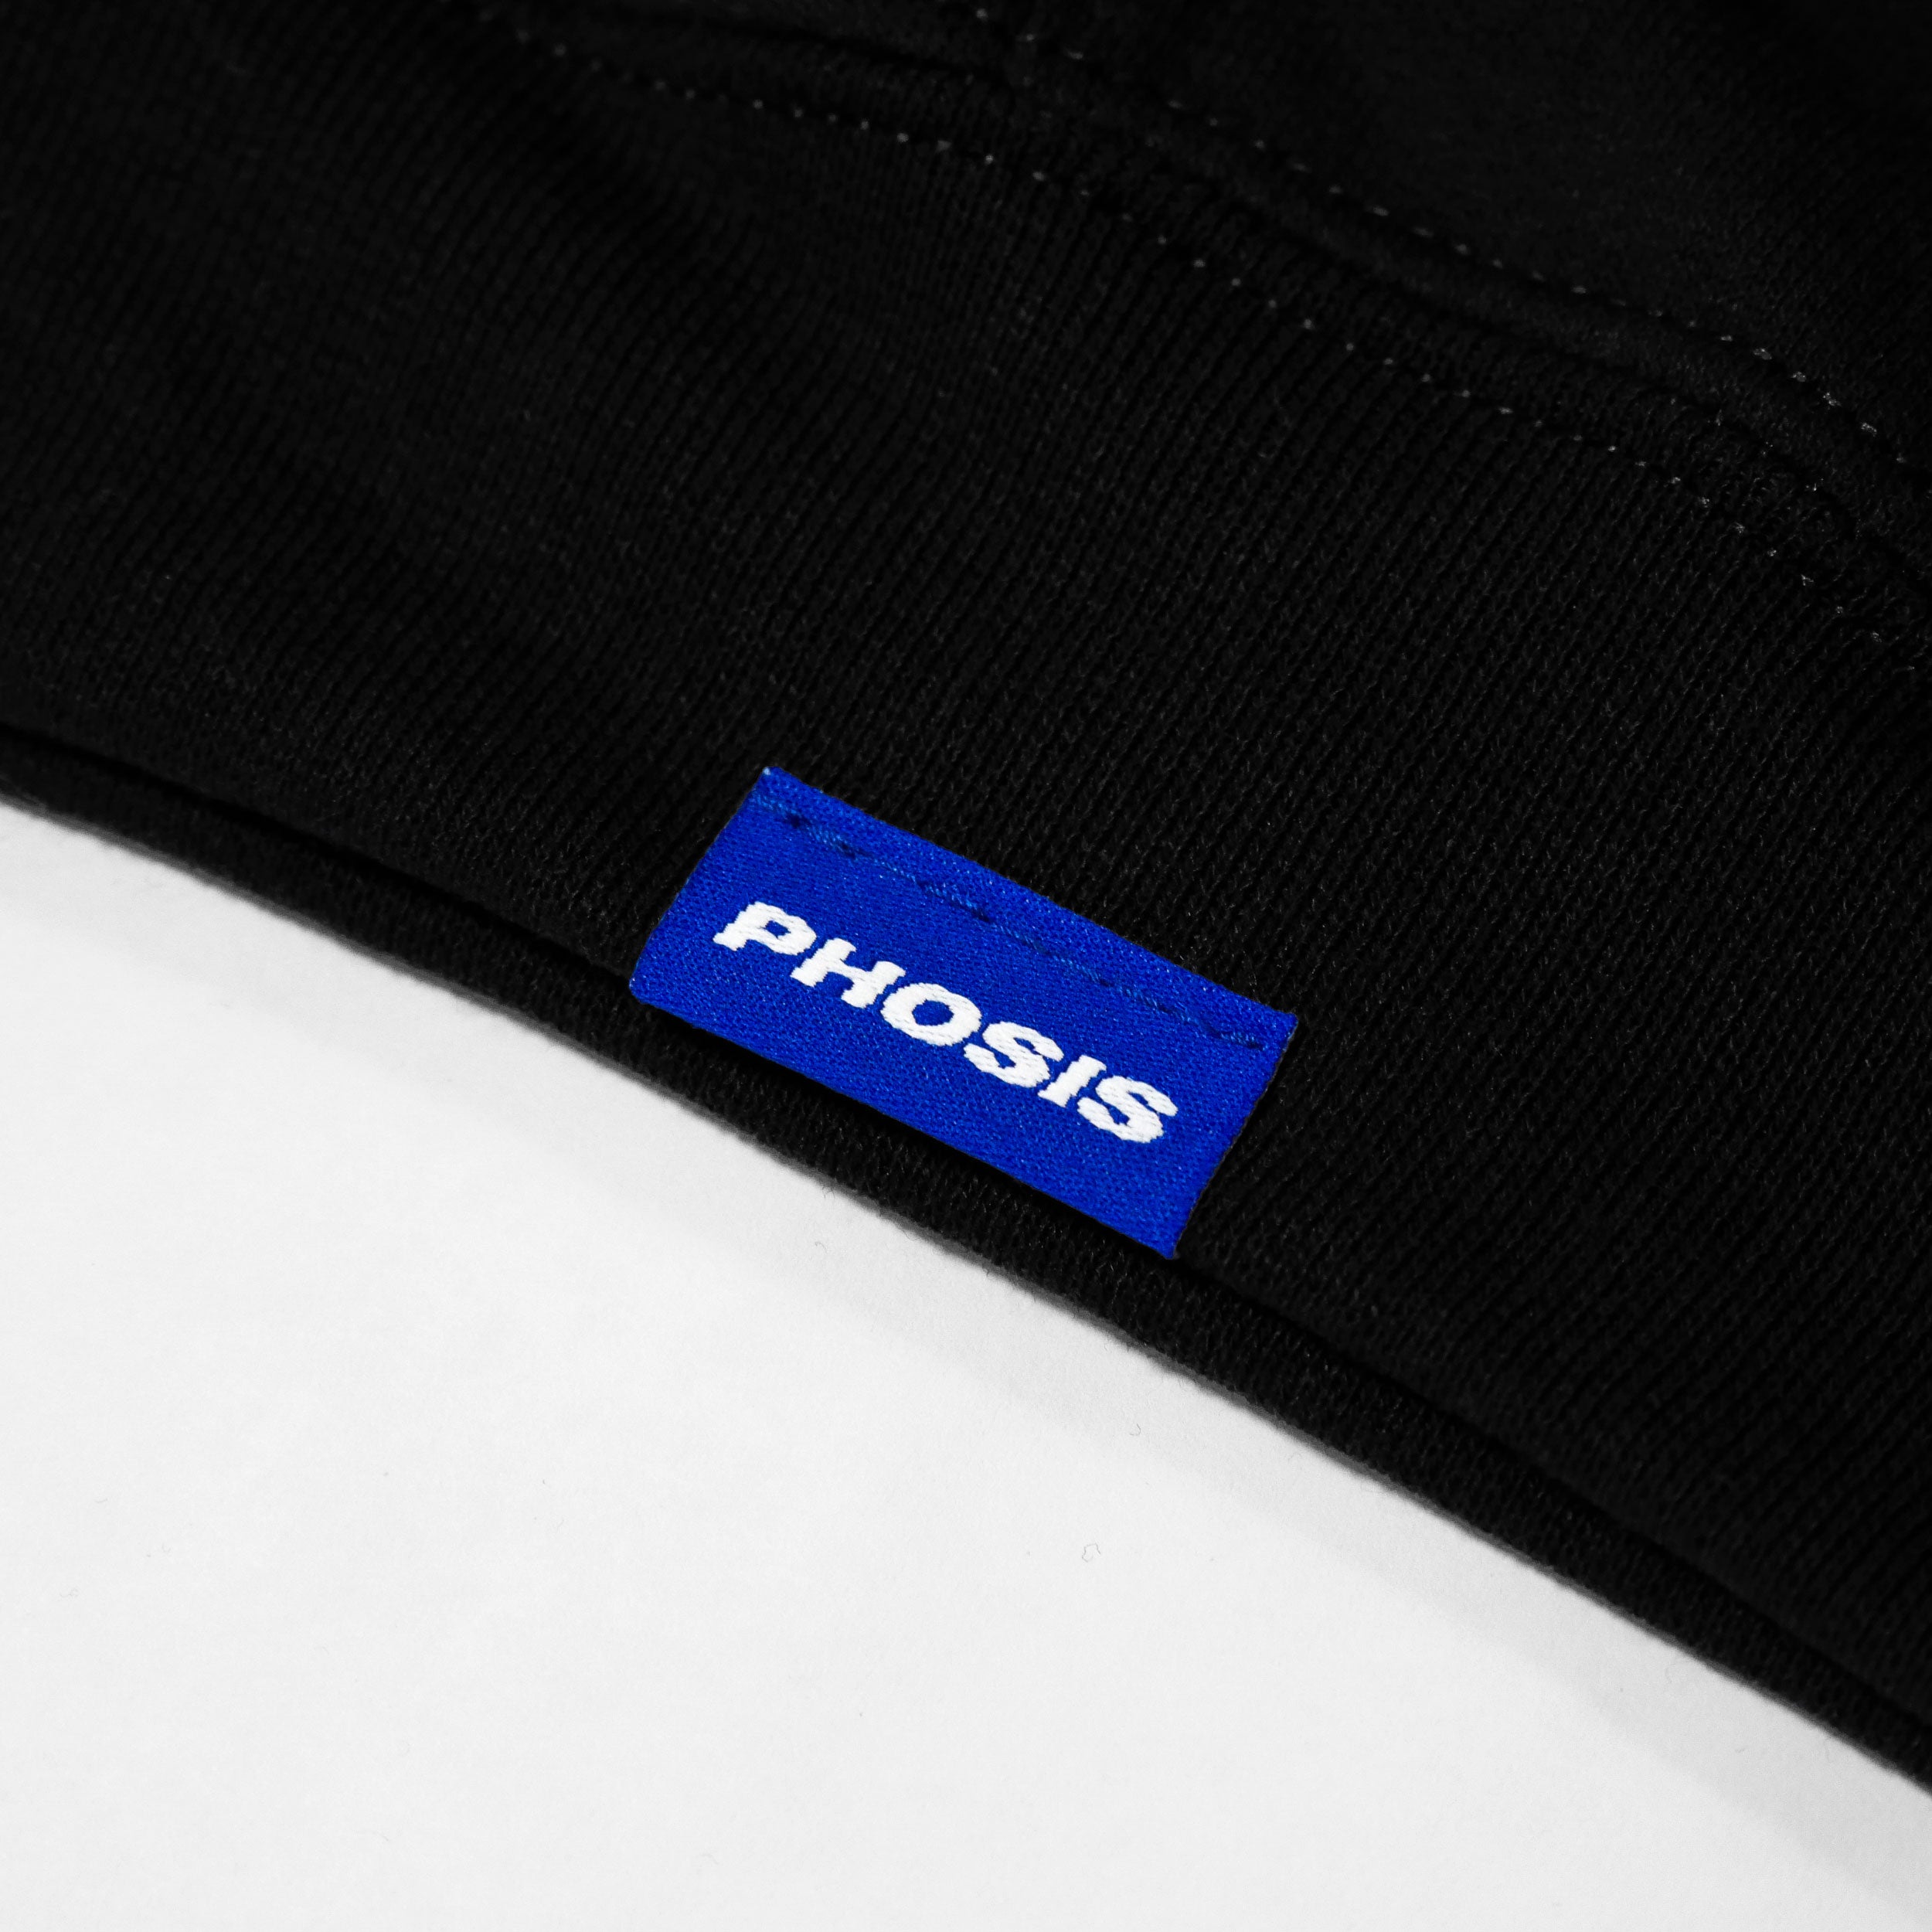 Sleeve close up view of the screen-pinted HYPERLINK black mediumweight hoodie from PHOSIS® Clothing